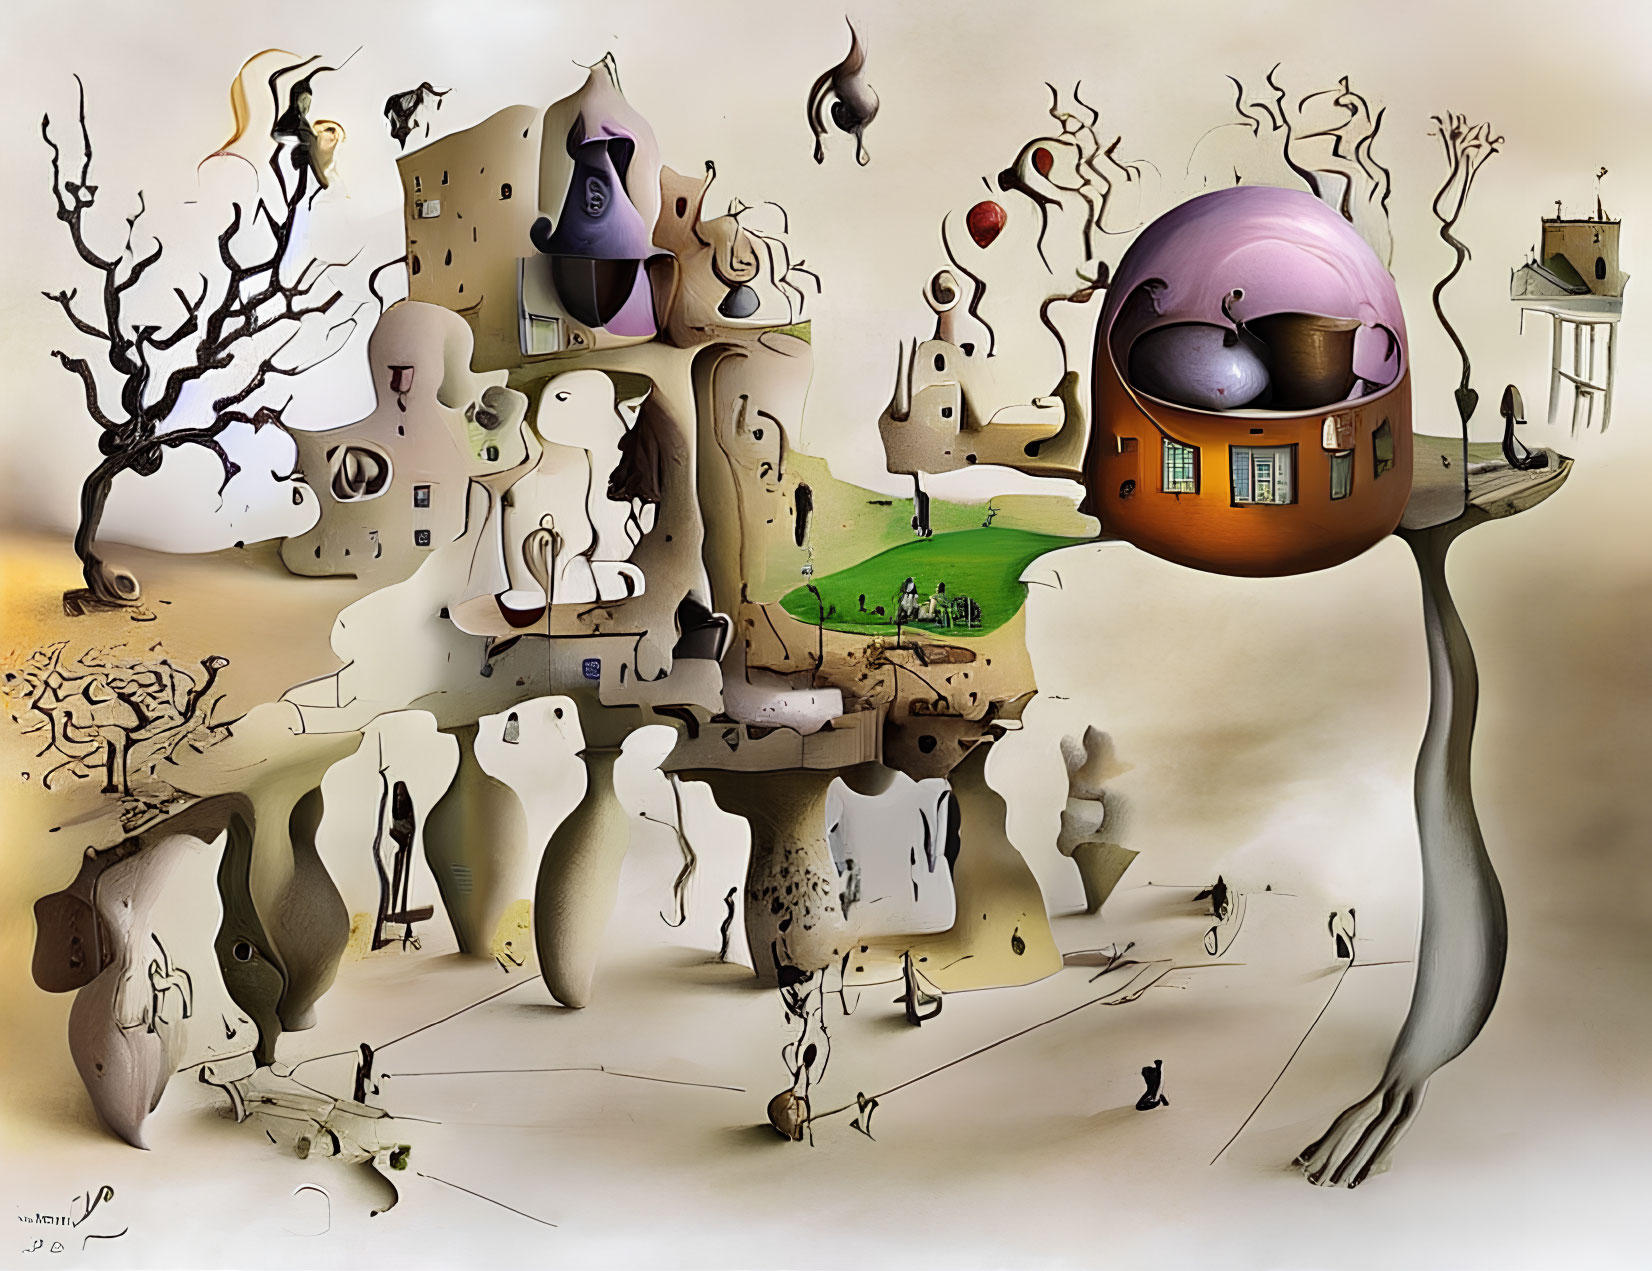 Abstract surreal artwork: floating island, whimsical structures, sphere with glasses, muted earthy tones